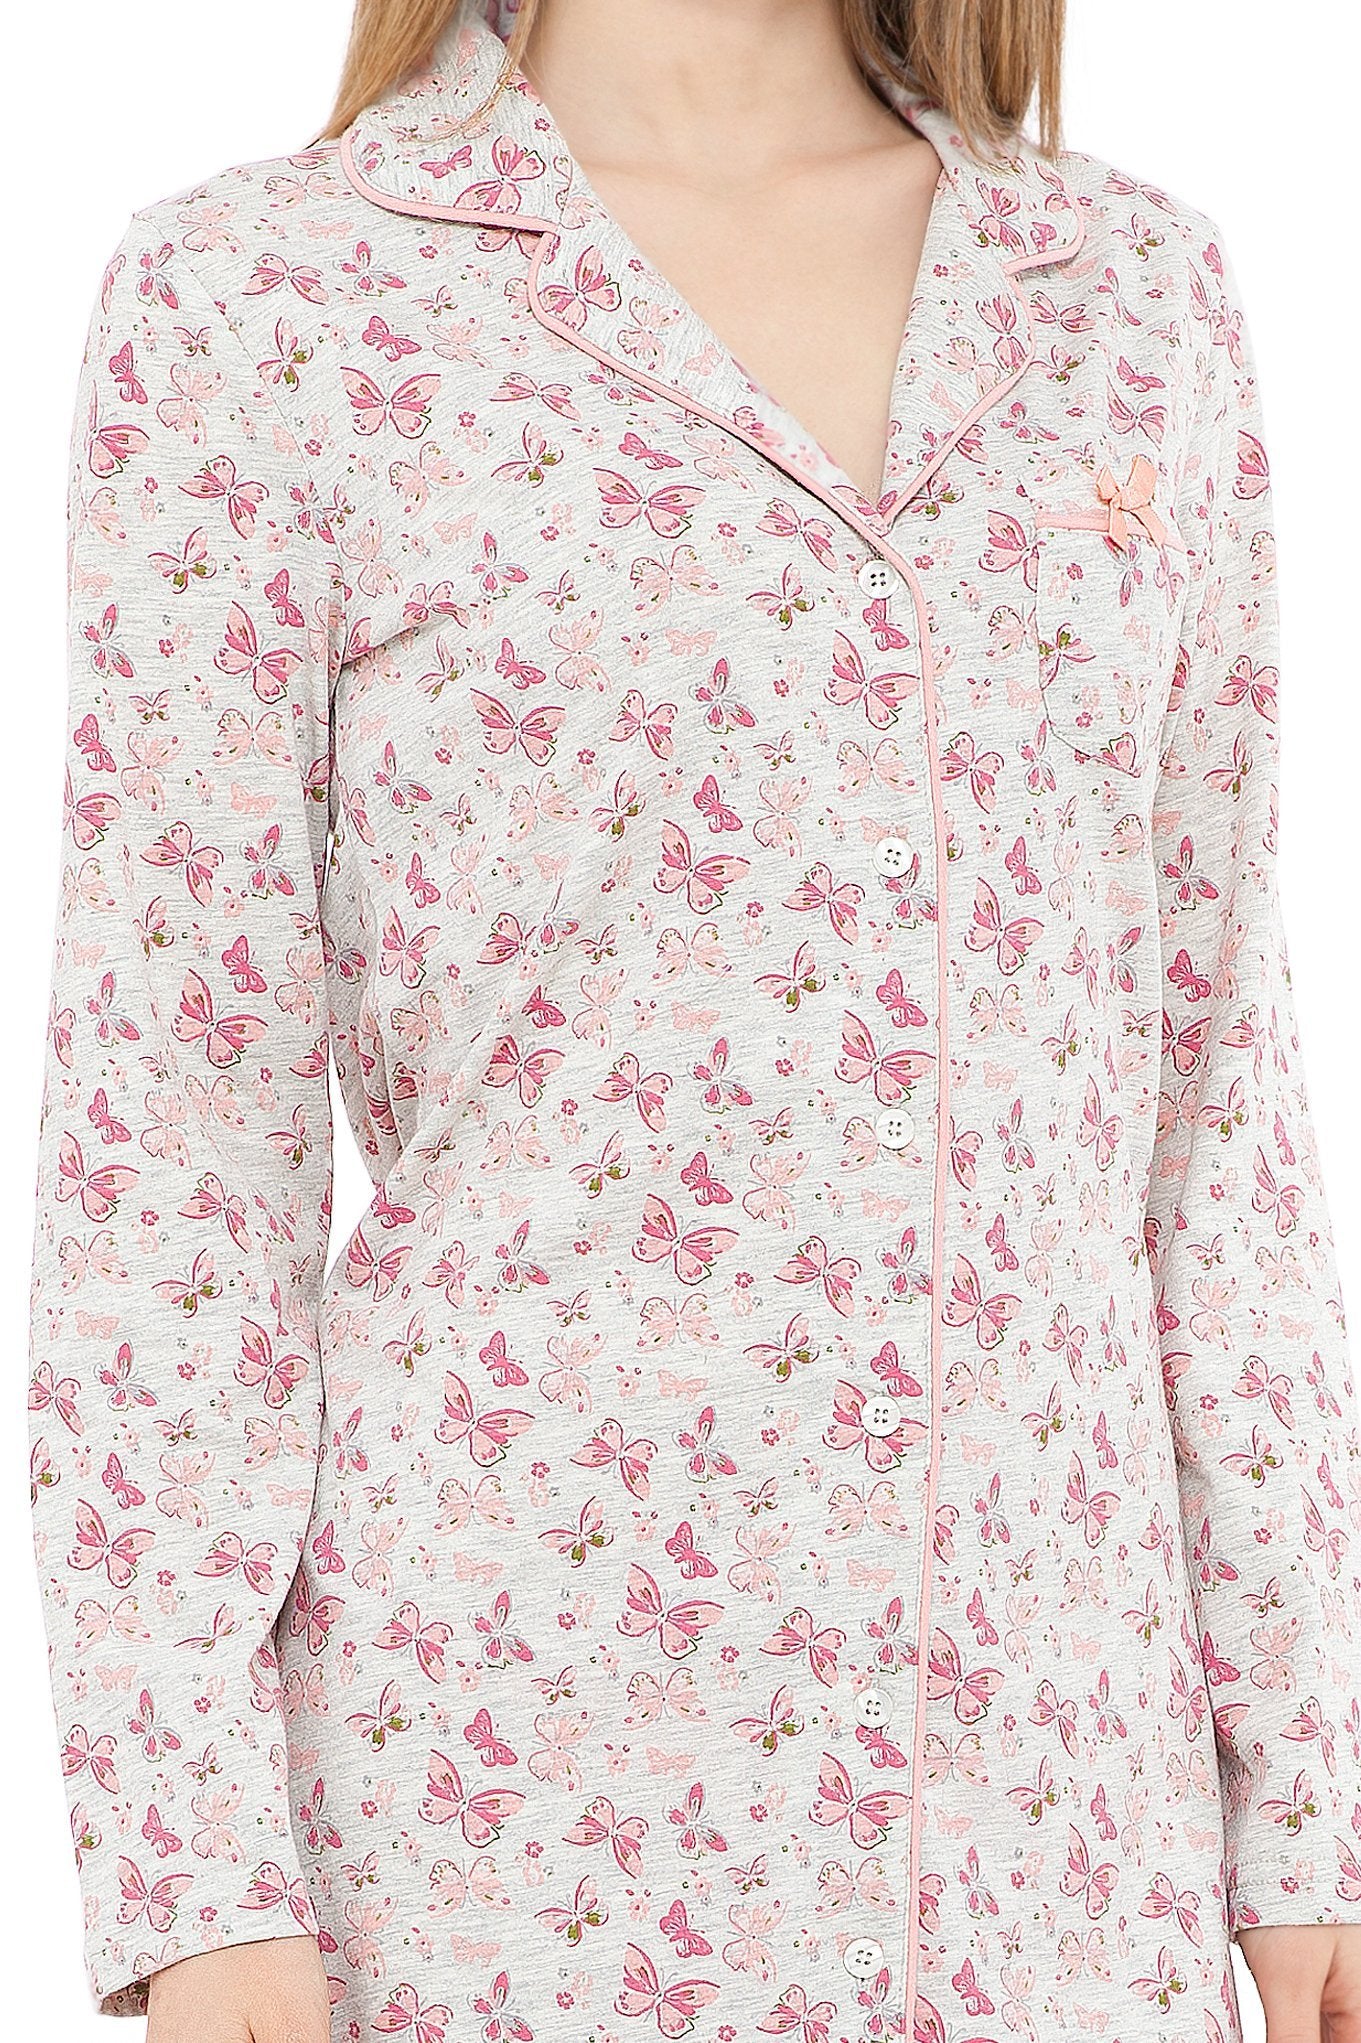 chassca nightdress with butterfly print - Breakmood